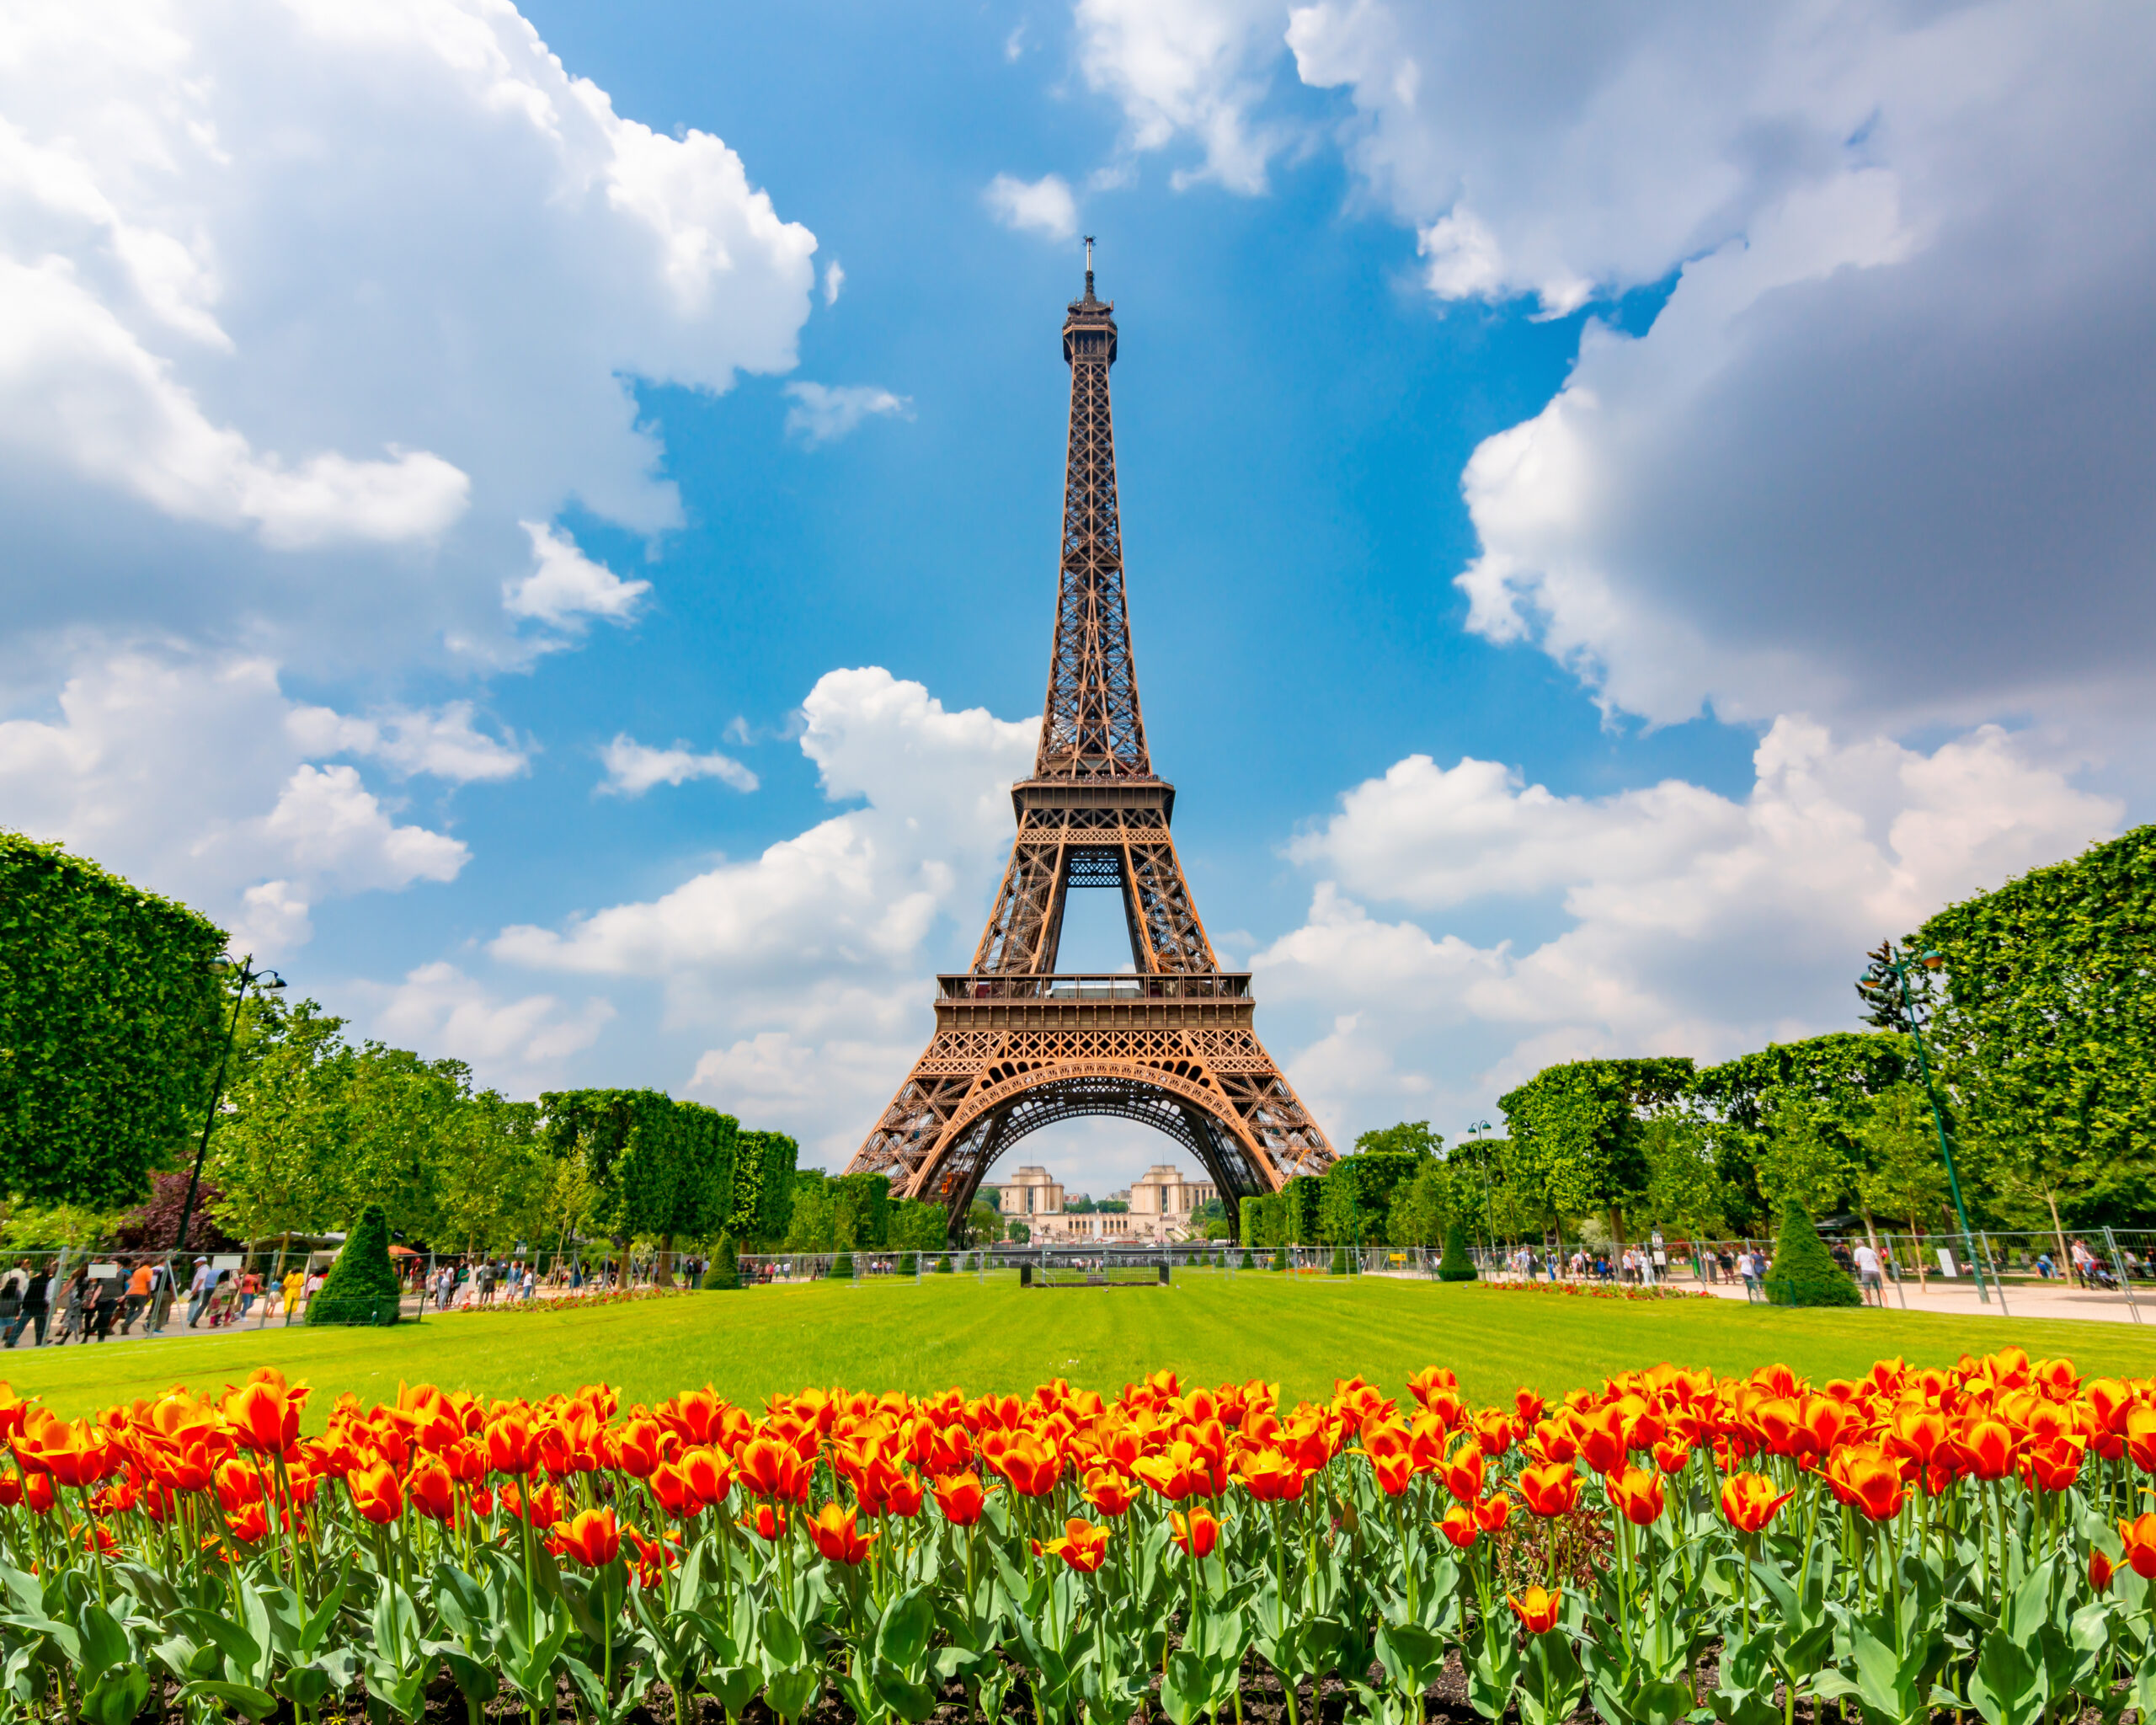 Eiffel Tower in Paris France with red tulips in front